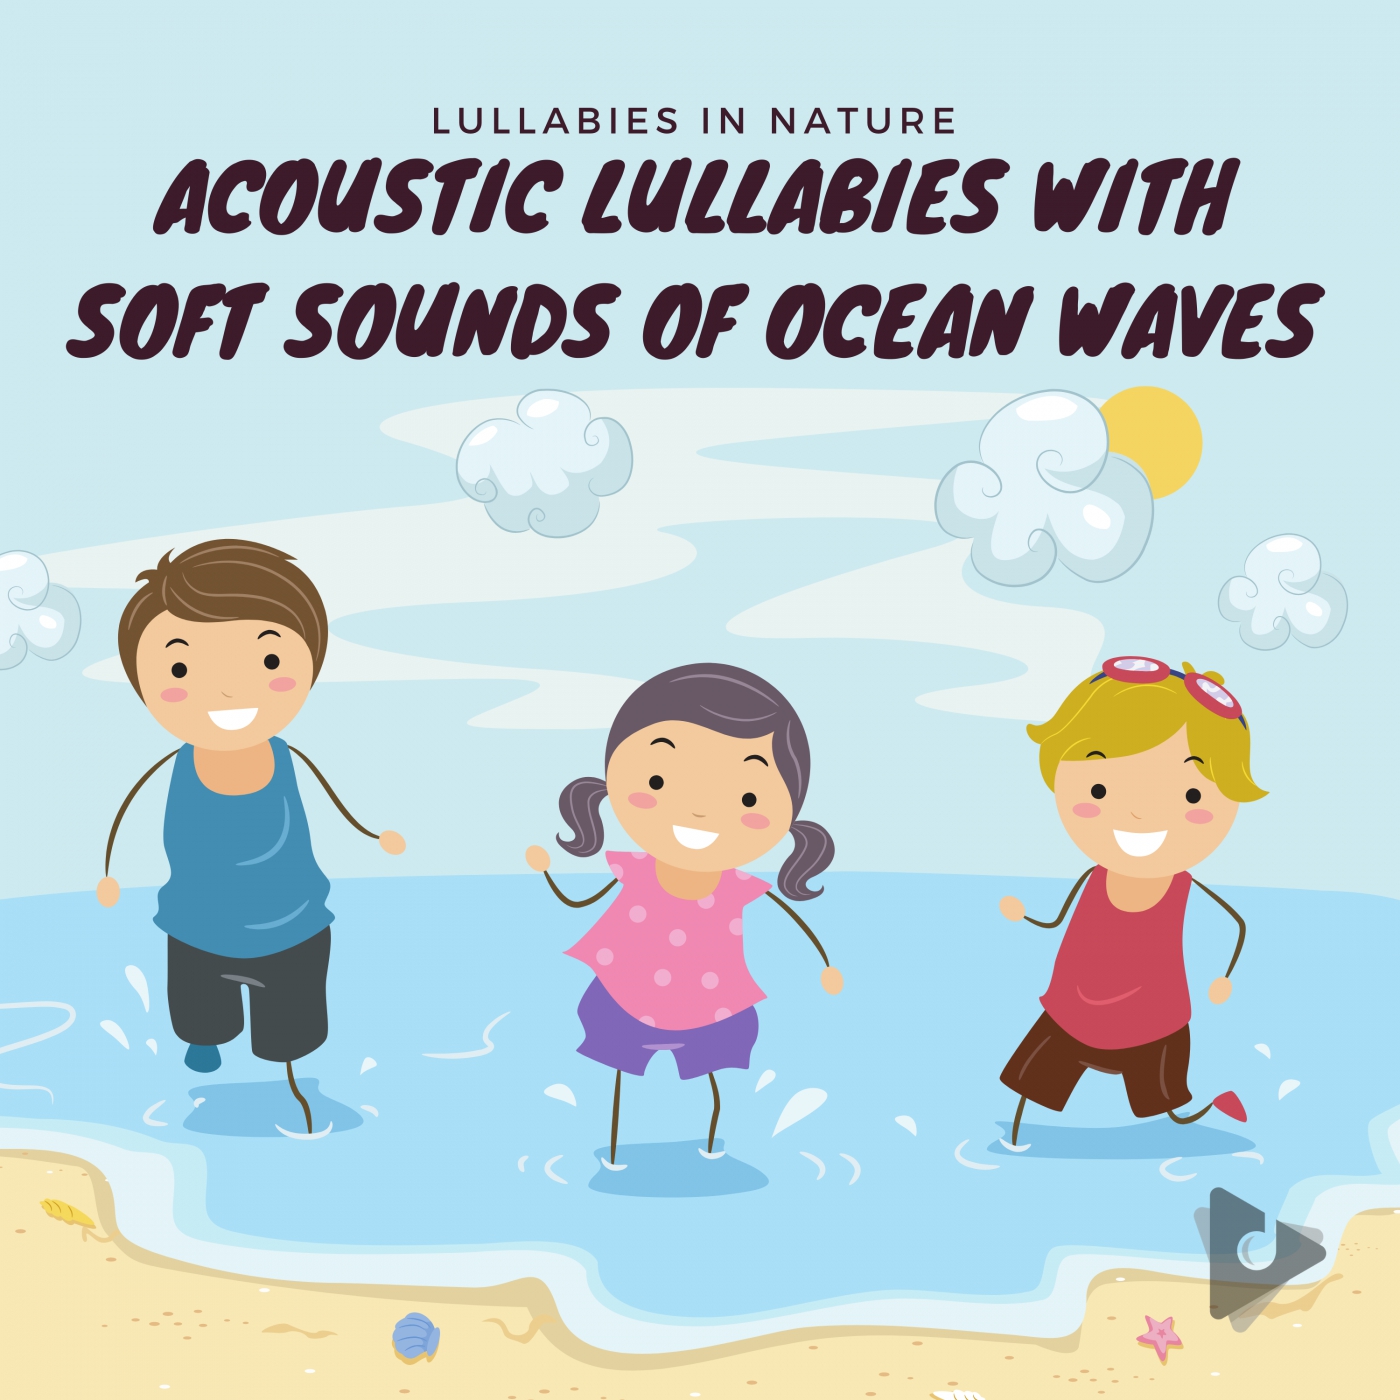 Acoustic Lullabies with Soft Sounds of Ocean Waves